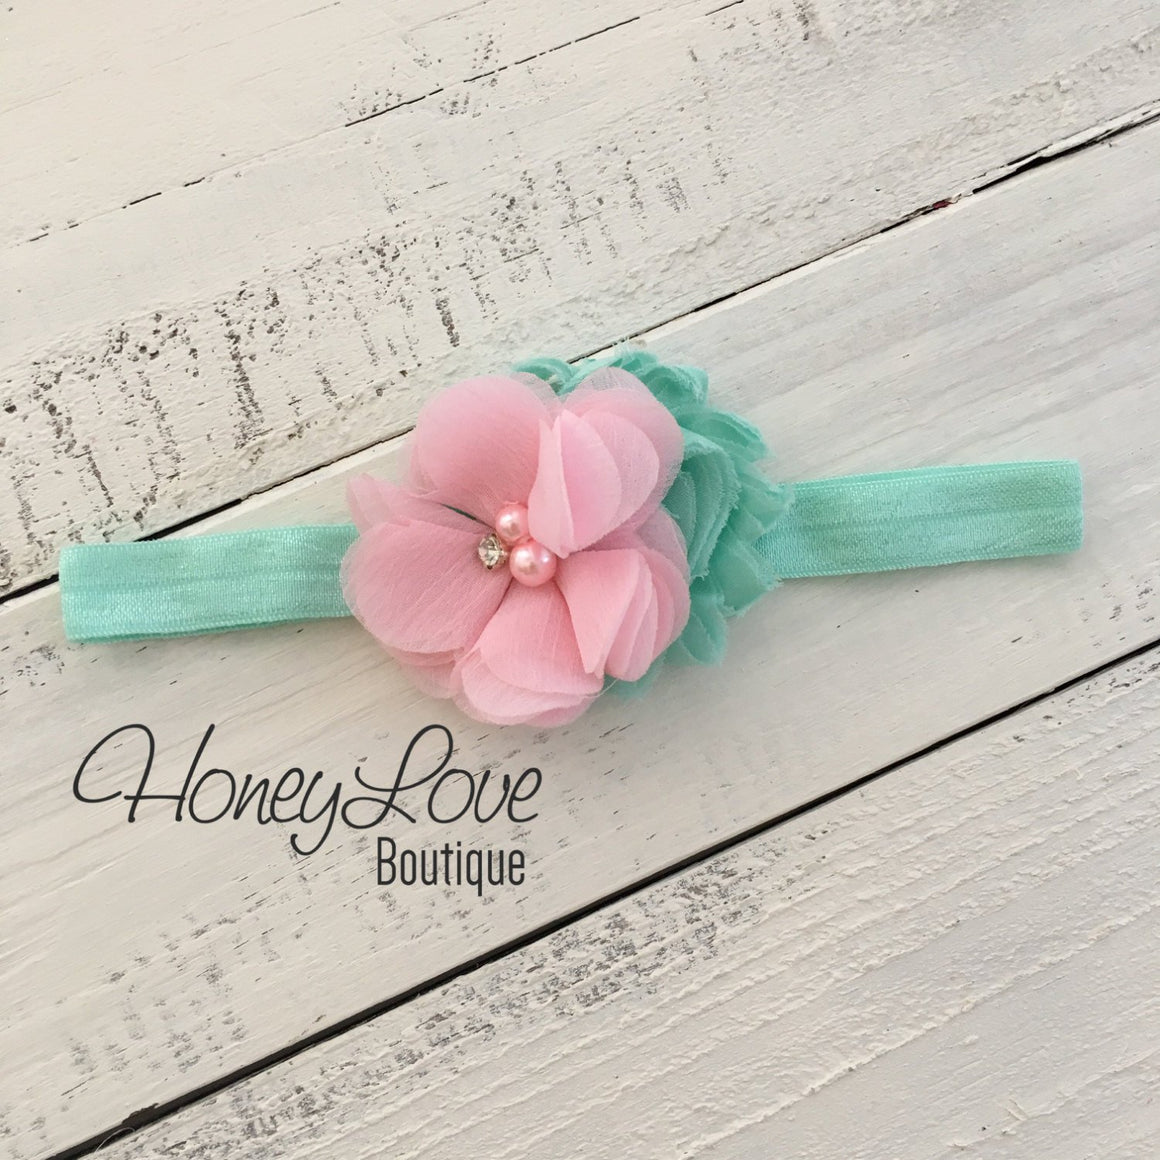 PERSONALIZED Name Outfit - Mint/Aqua and Silver Glitter - Light Pink flower embellished tutu skirt bloomers - HoneyLoveBoutique